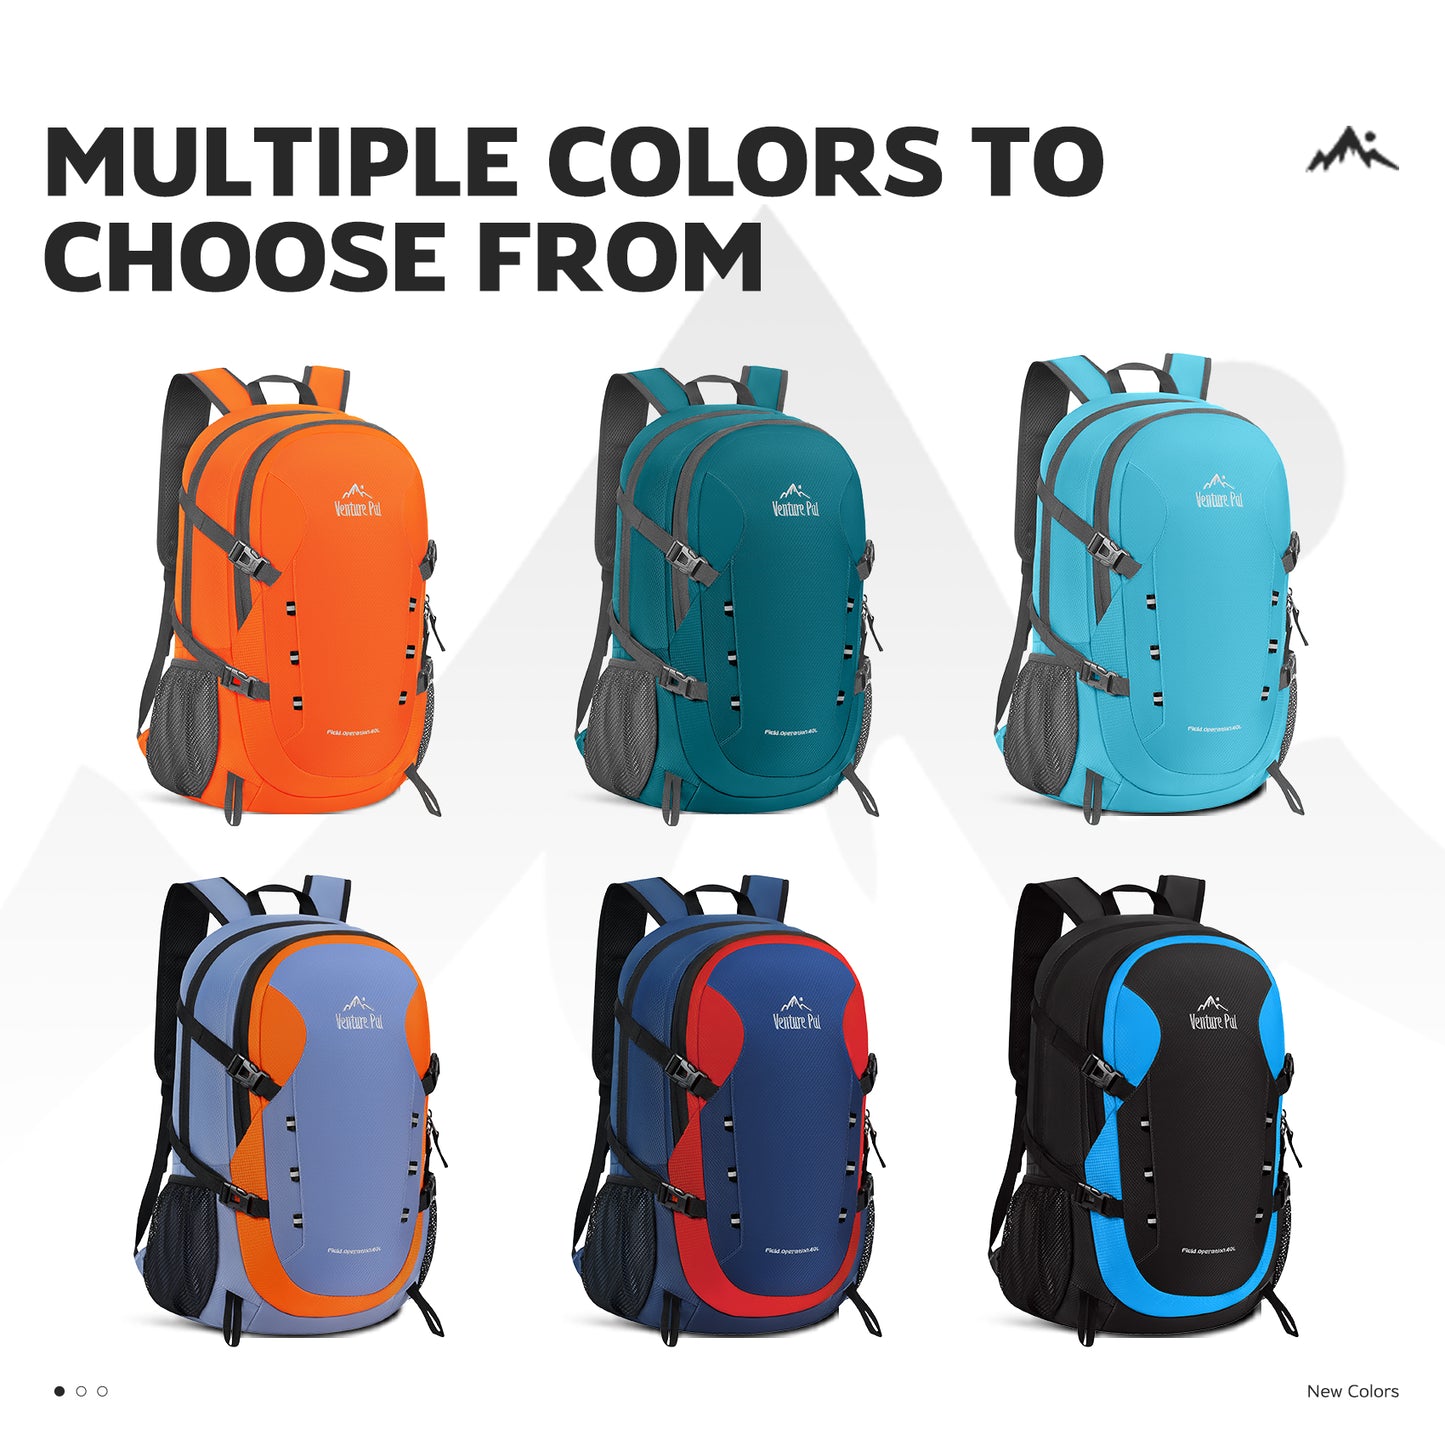 Venture Pal Black/Blue 40L Nylon Backpack with Wet Pocket and Multi Compartment